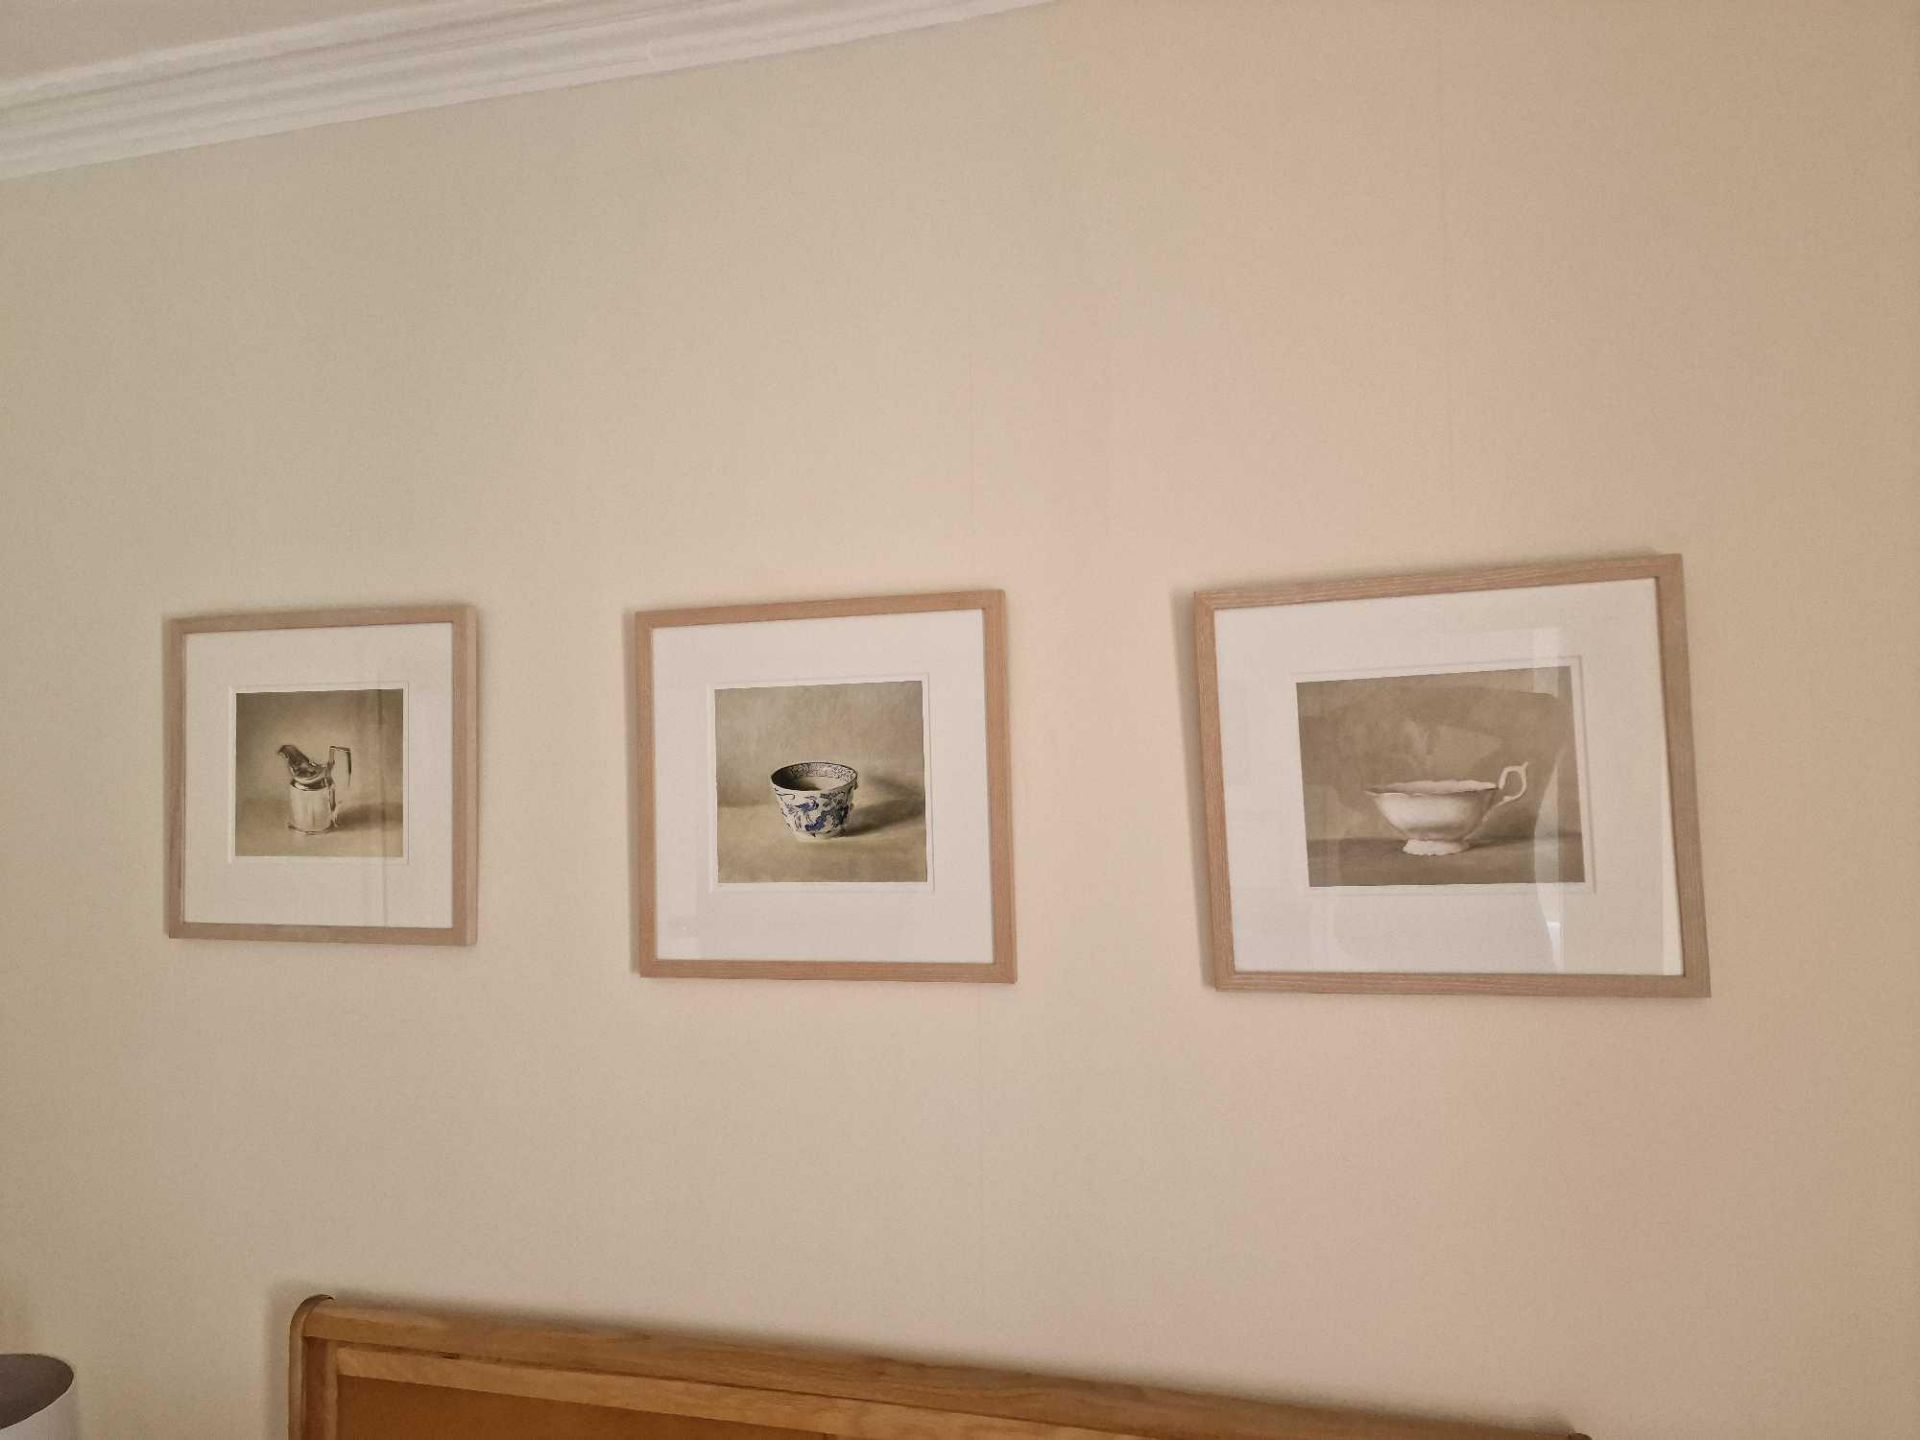 A Set Of 3 Framed Signed Wall Art By Richard Hoare (1) Still Life Shaftesbury Limited Edition 2/